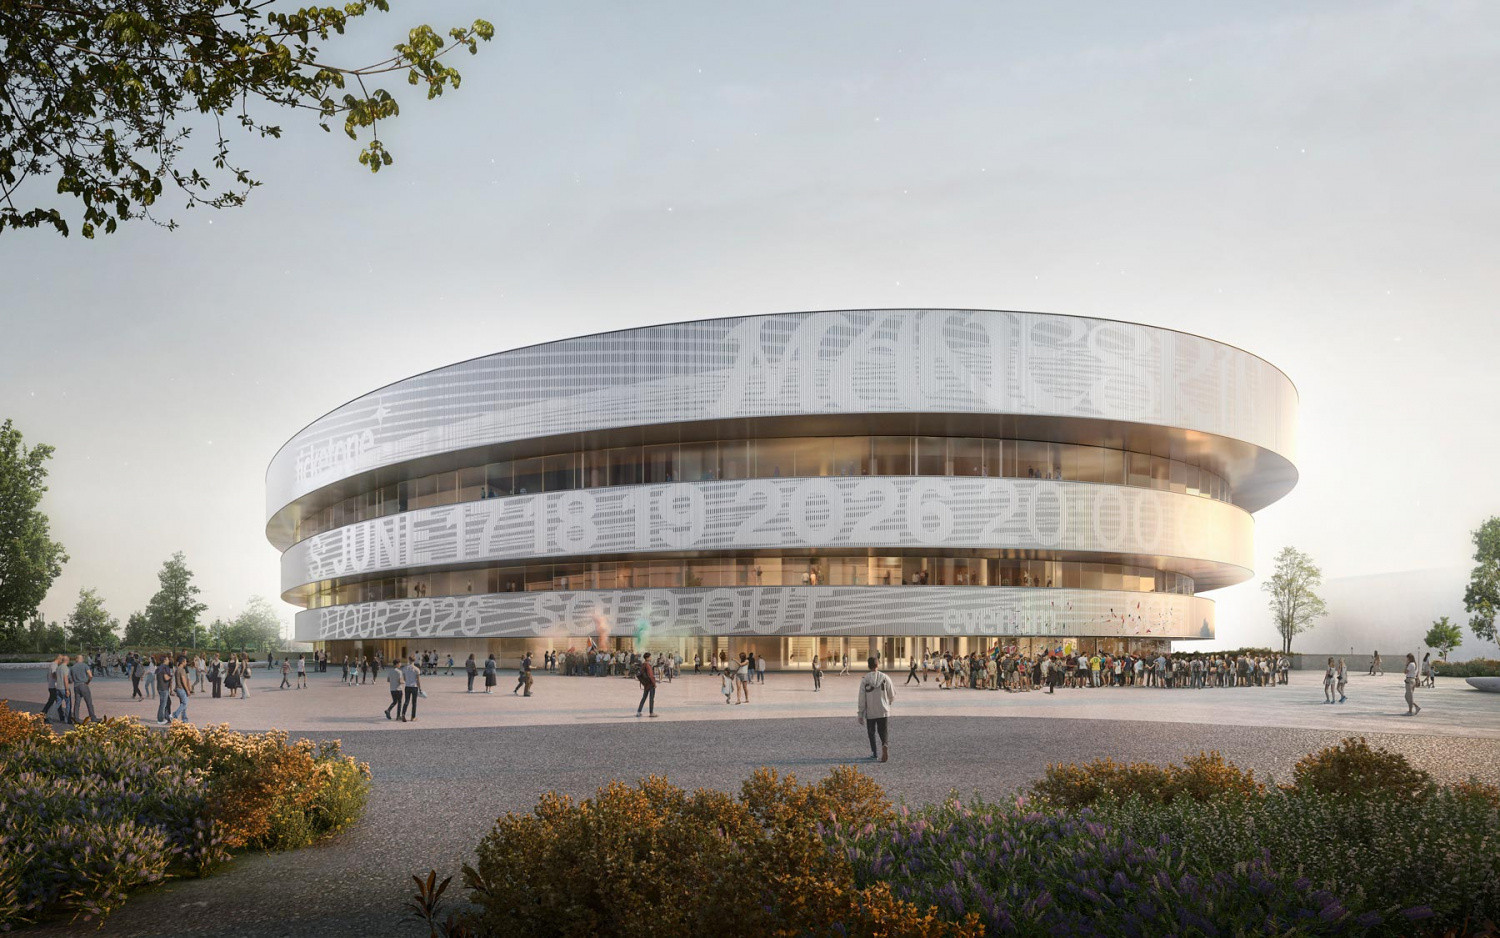 An artist's impression of the Arena Santa Giulia that will host ice hockey at the 2026 Winter Games as envisaged by British architect Sir David Chipperfield ©Onirism Studio